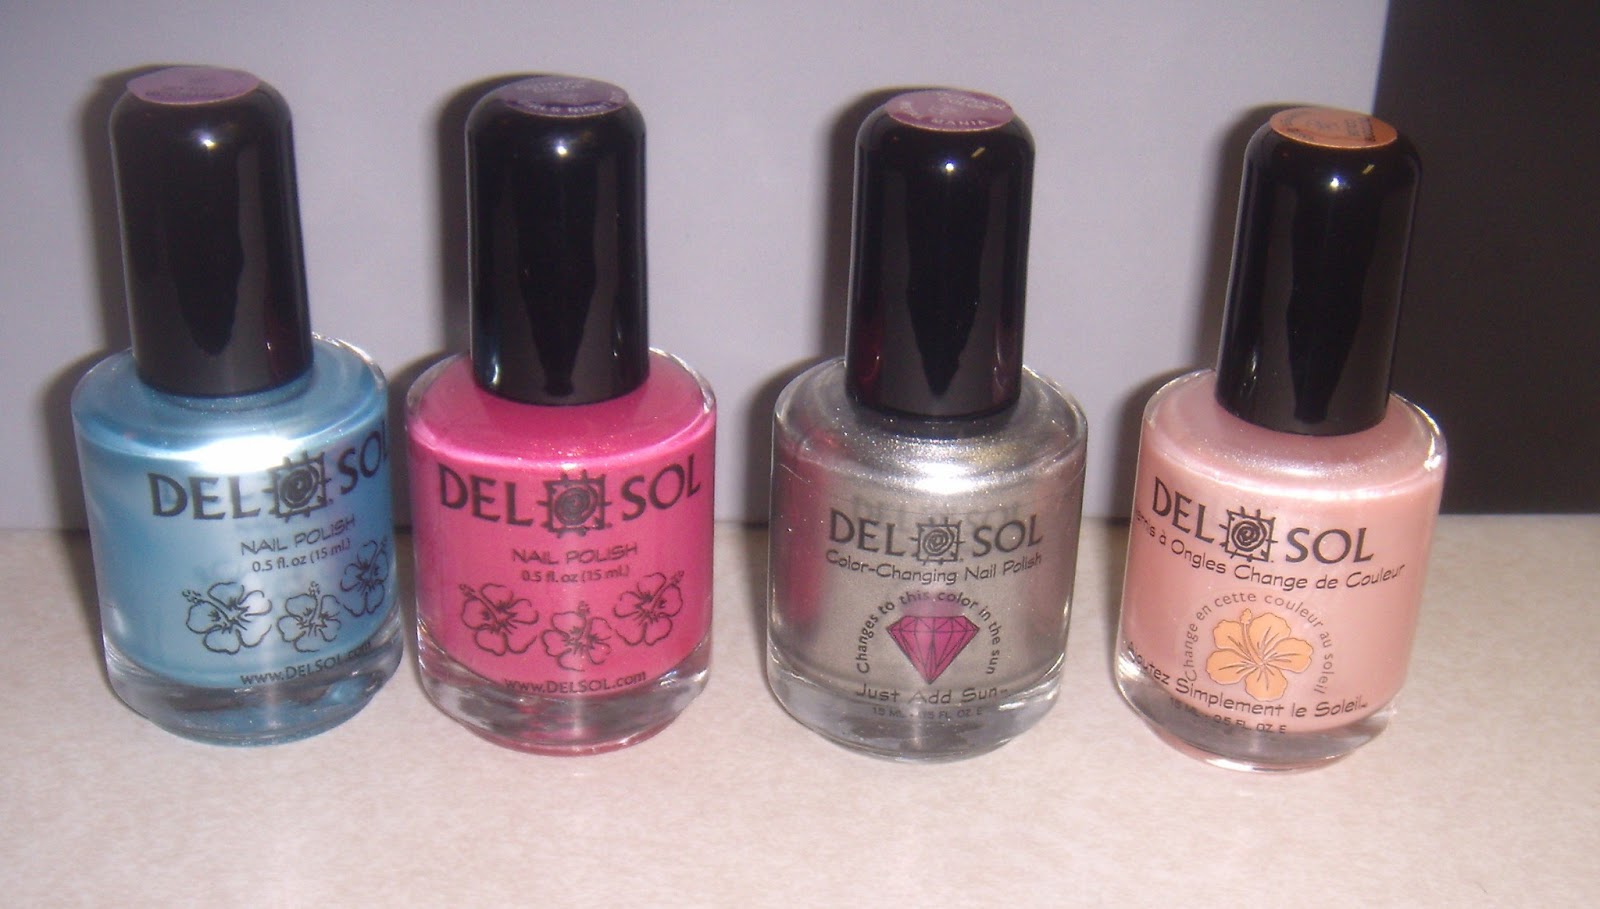 1. Color Changing Nail Polish - Del Sol - wide 2